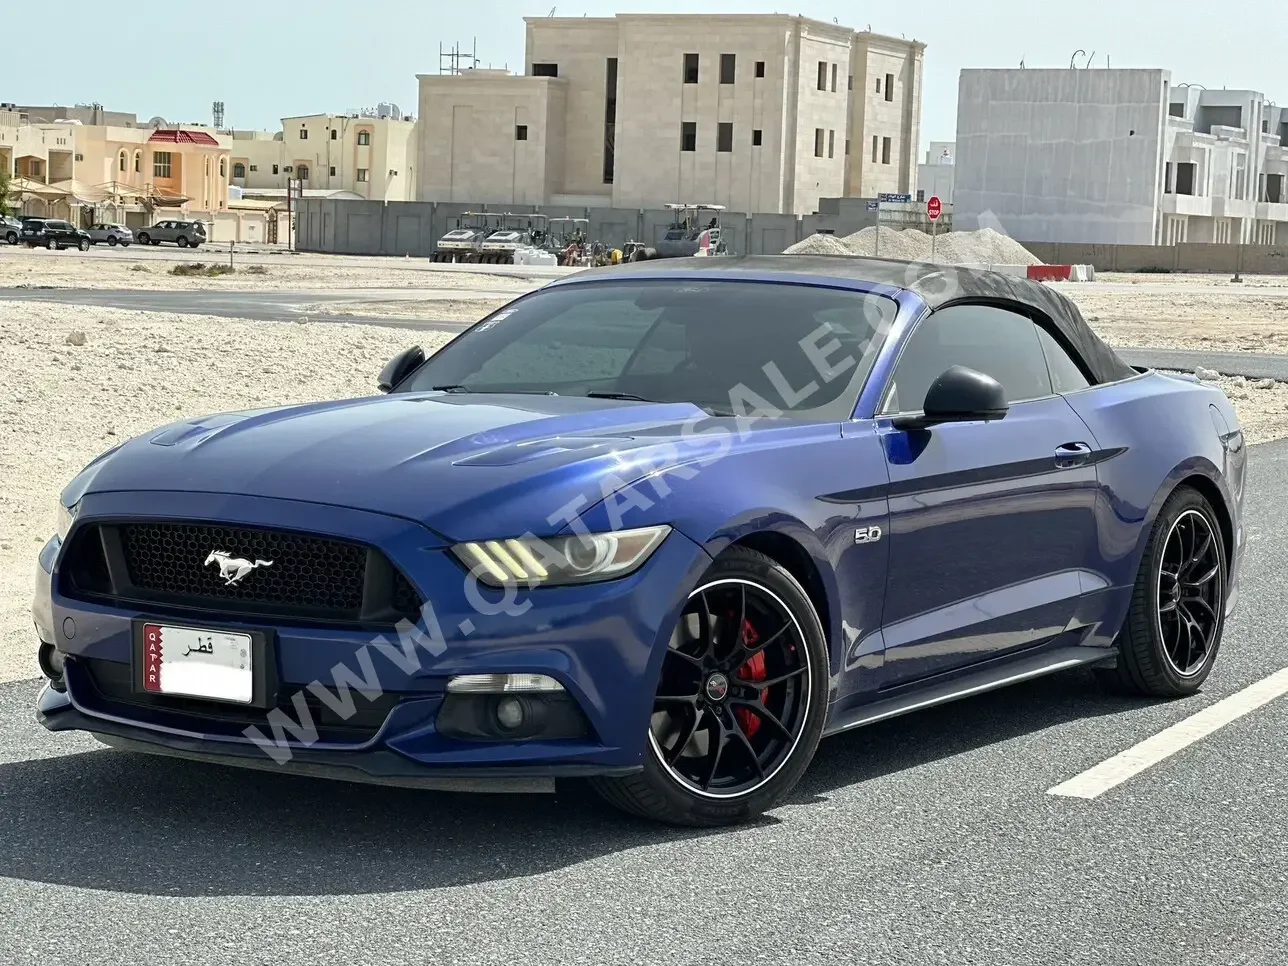 Ford  Mustang  GT  2015  Automatic  158,000 Km  8 Cylinder  Rear Wheel Drive (RWD)  Convertible  Blue